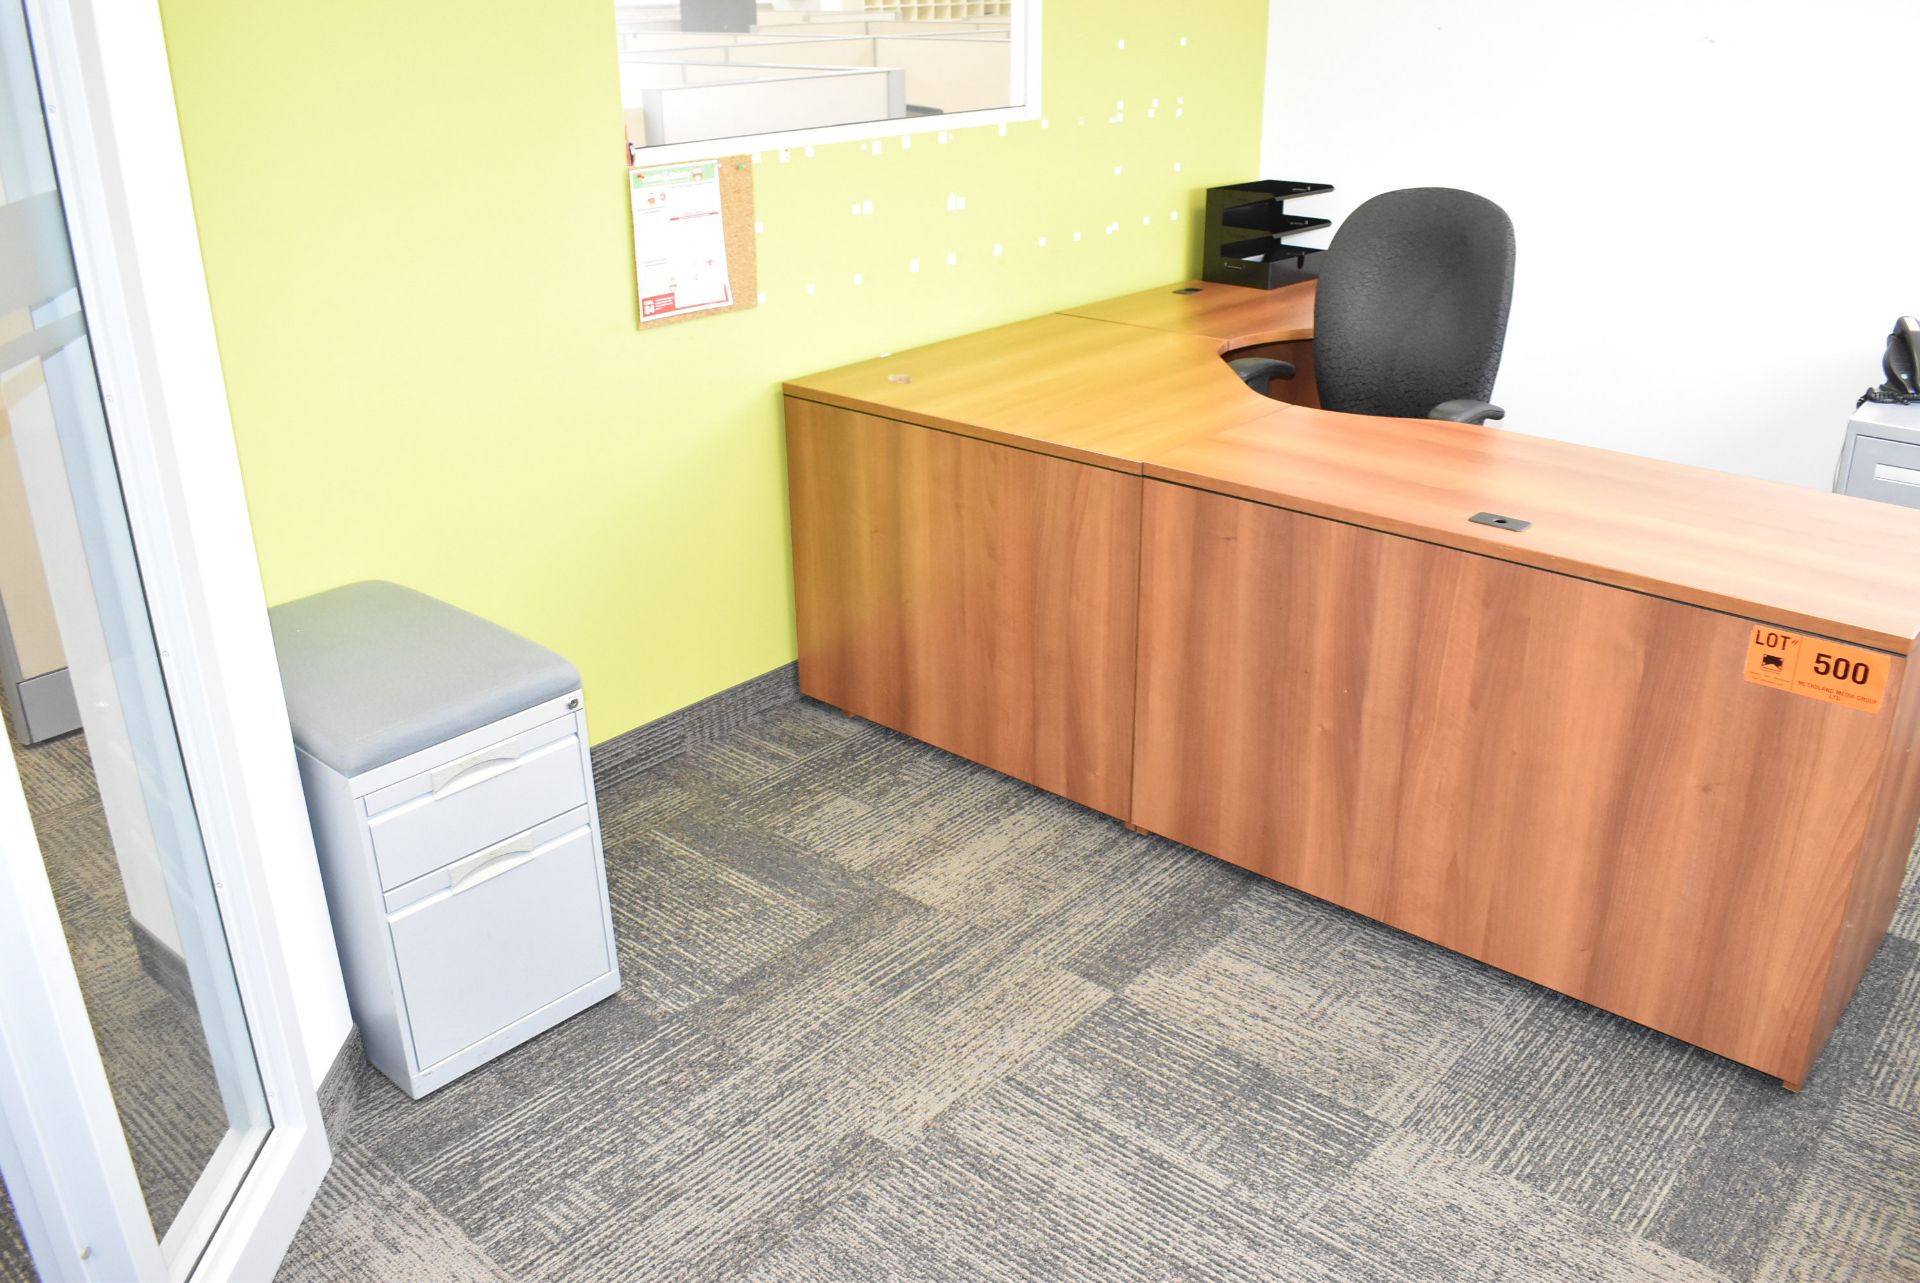 LOT/ CONTENTS OF OFFICE CONSISTING OF DESK WITH OFFICE CHAIR, 2-DRAWER LATERAL FILE CABINET, SMALL - Image 2 of 3